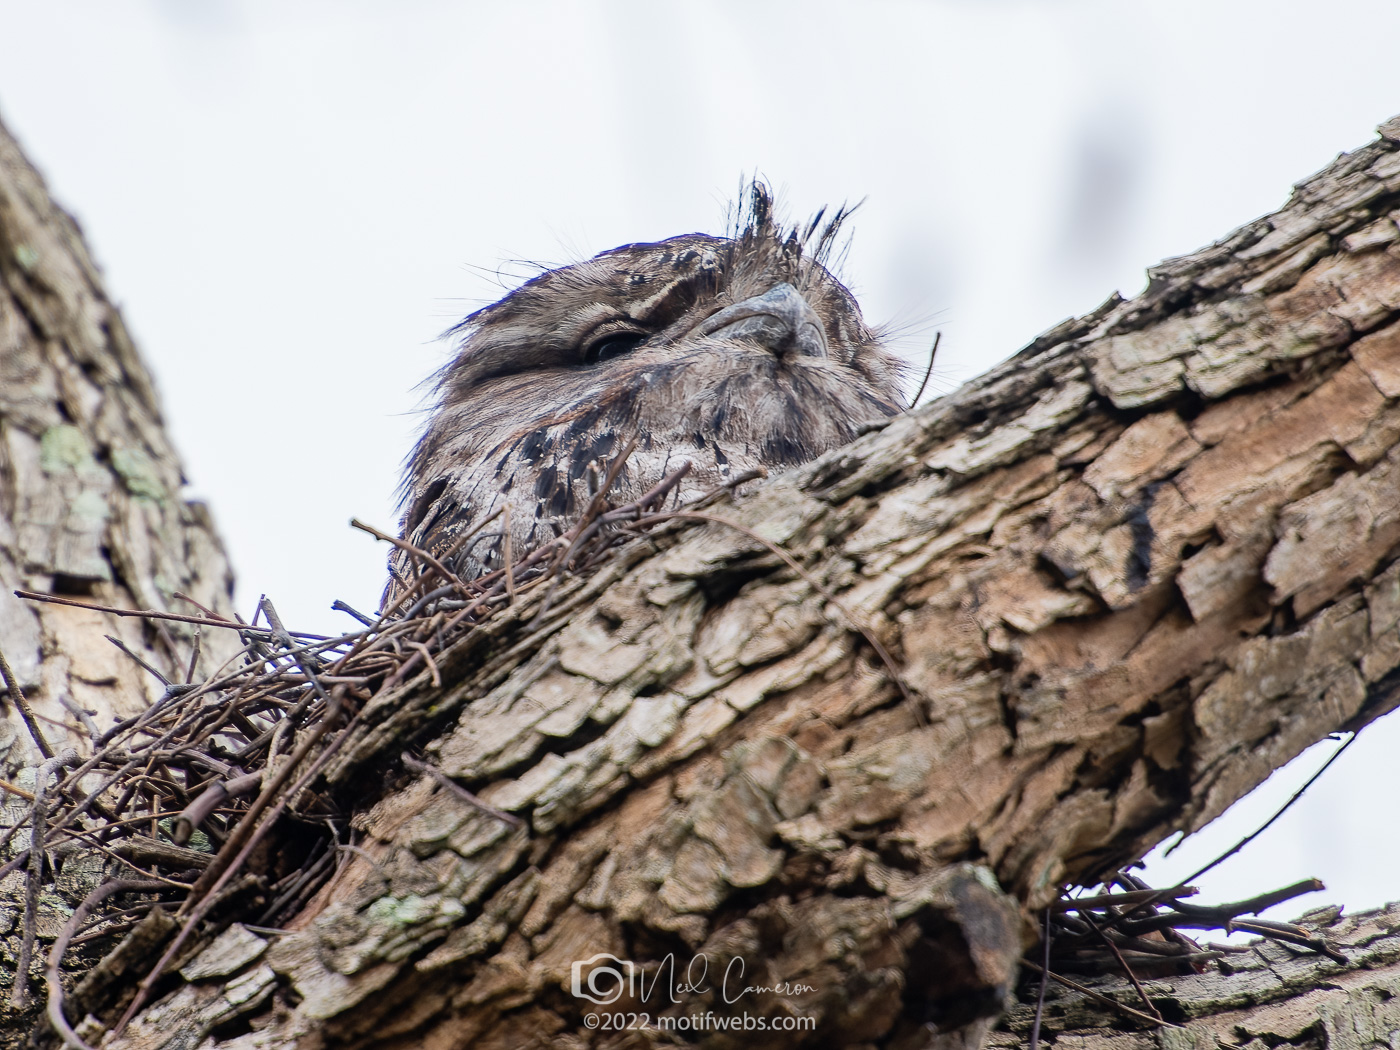 Nesting Tawny Frogmouth, Uni of Qld, St Lucia